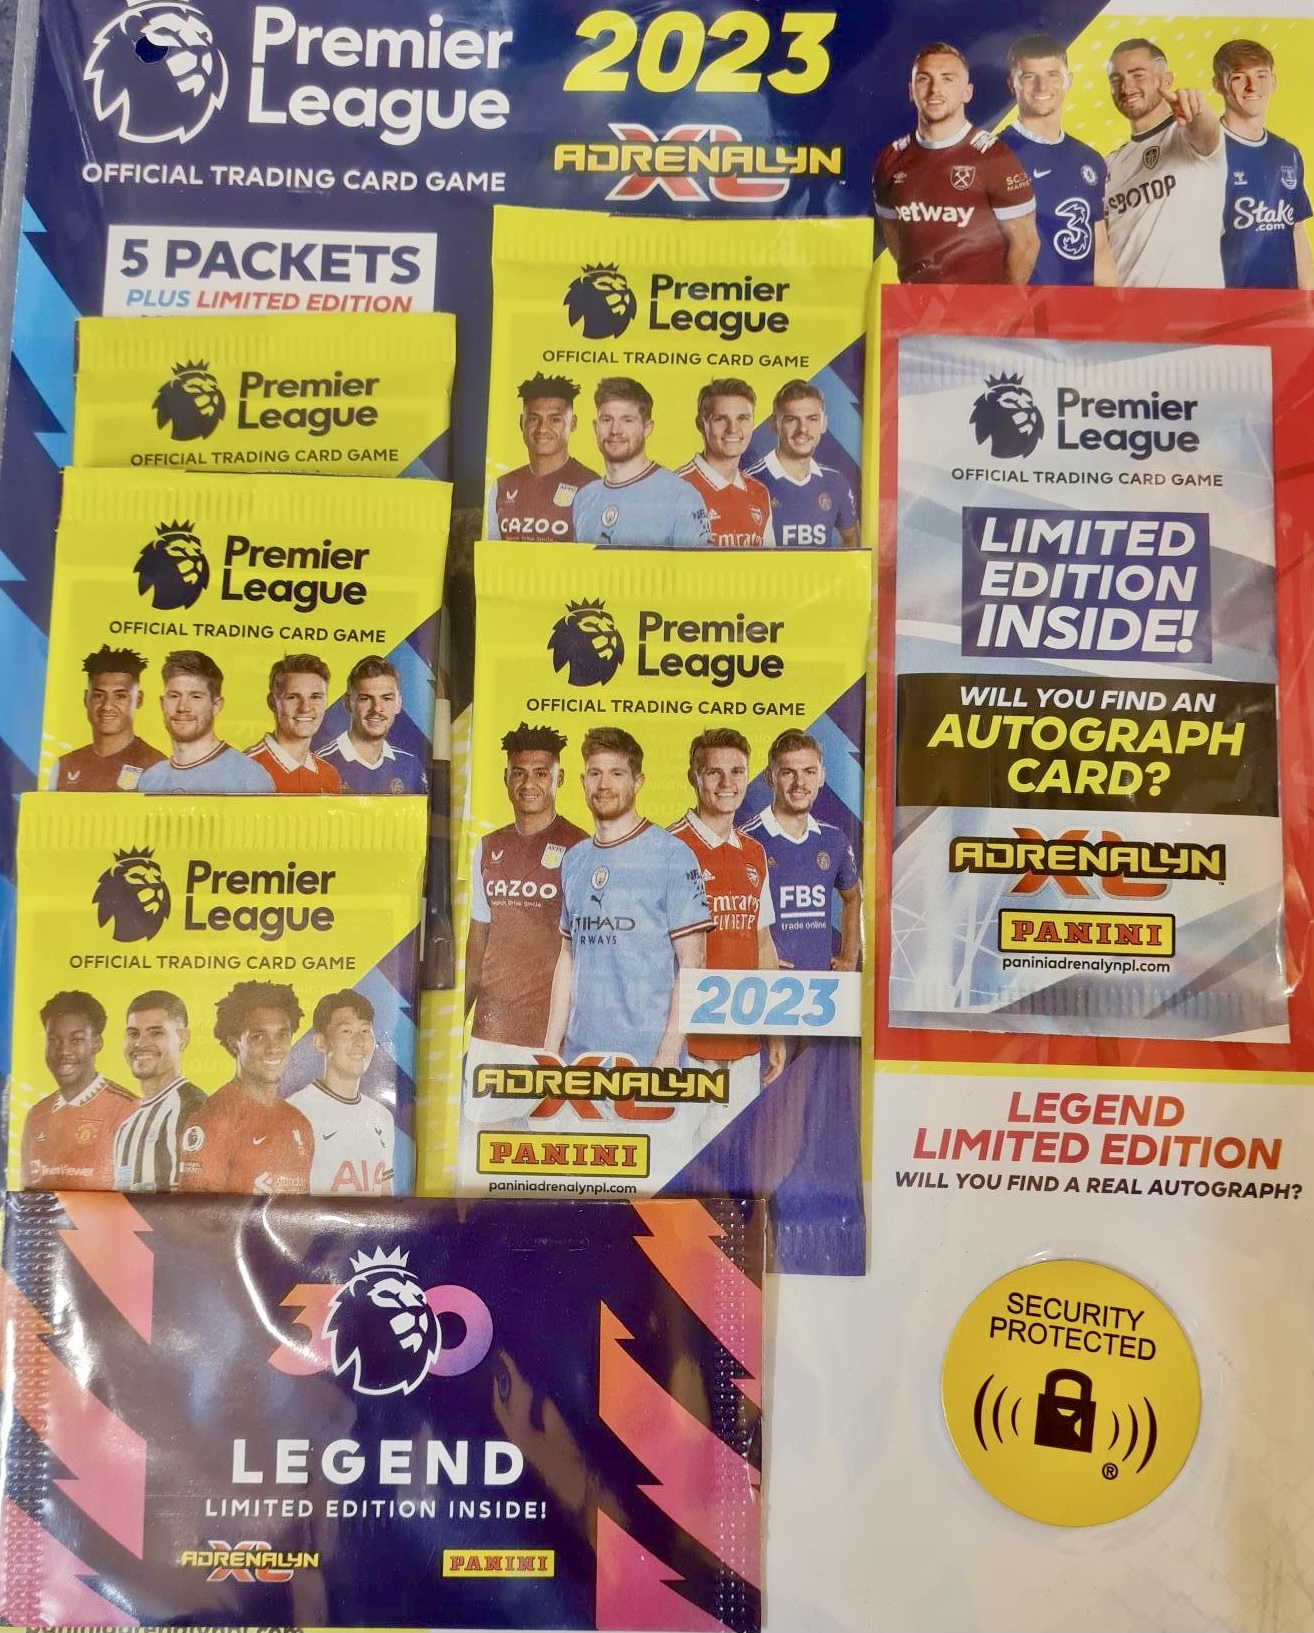 Multi-Pack - Premier League Adrenalyn 2020/21 Trading Card Collection (5 Packets and 1 Limited Edition card)